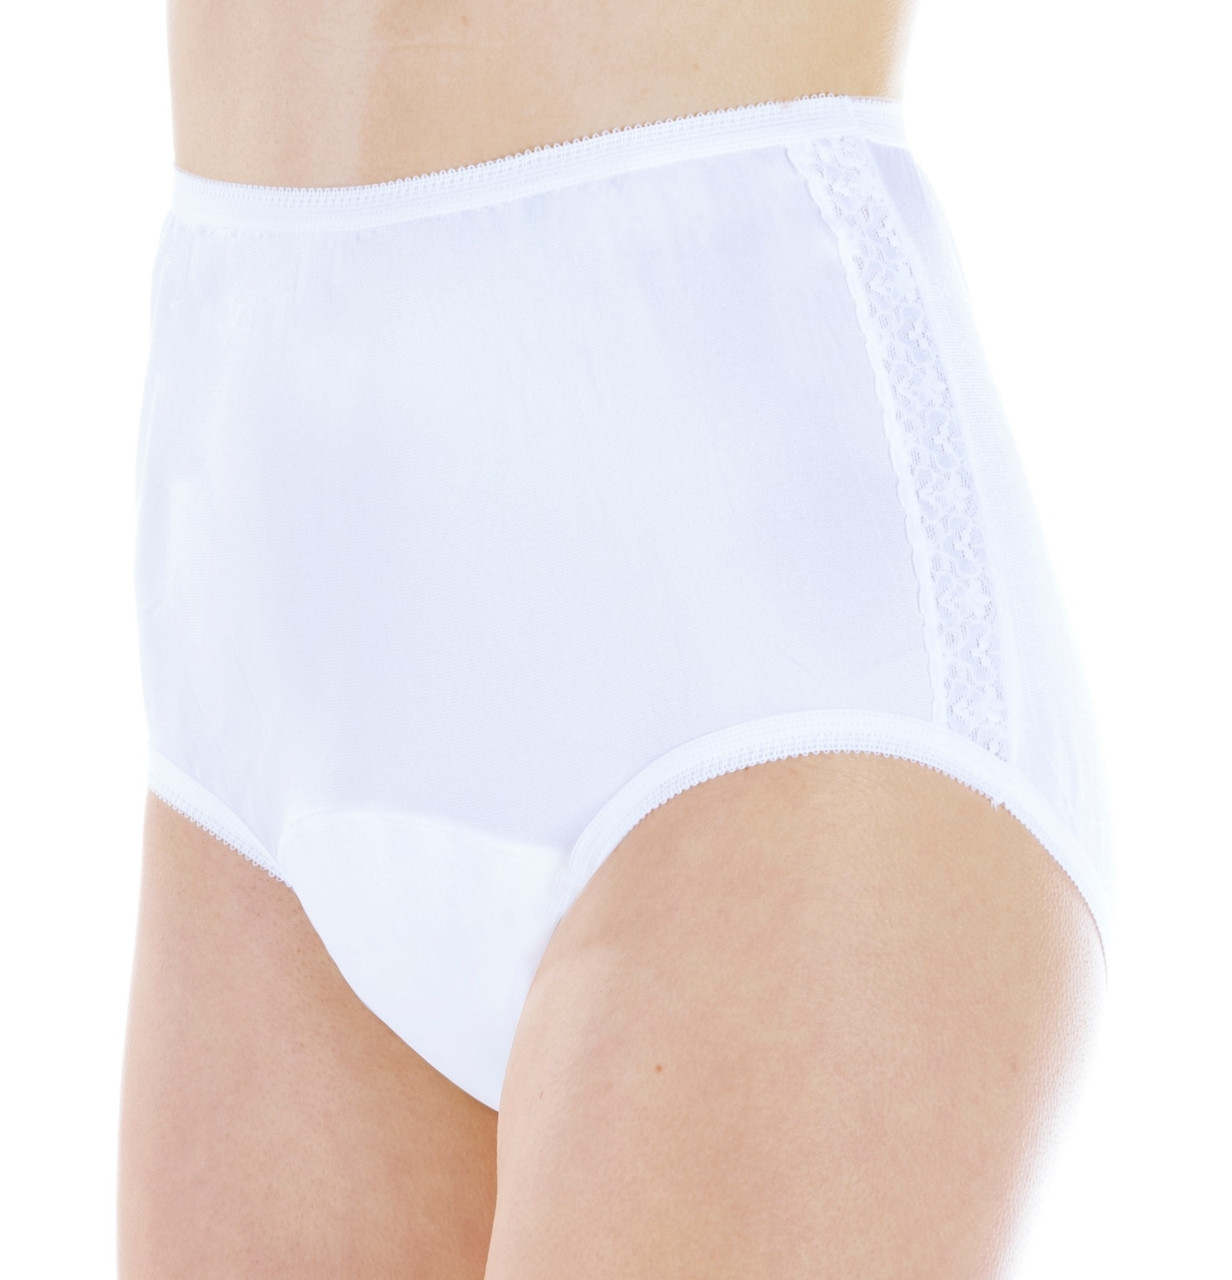 Wearever Women's Maximum Absorbency Incontinence Panties for